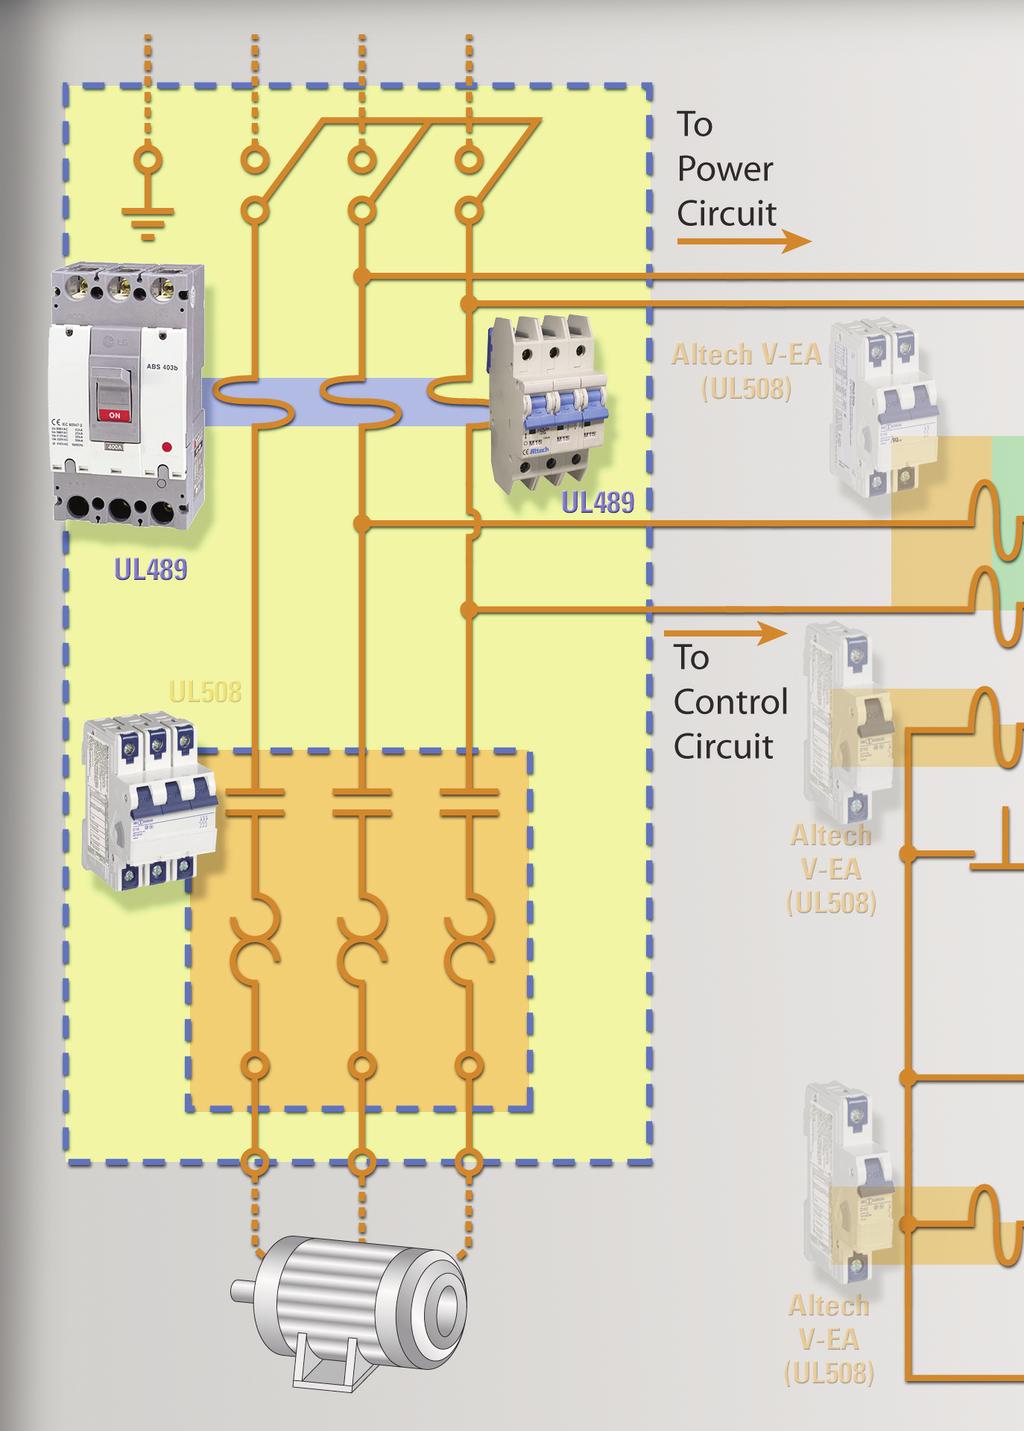 Typical UL489 Application Power Circuit of a UL508A Panel Disclaimer: This is an application example.